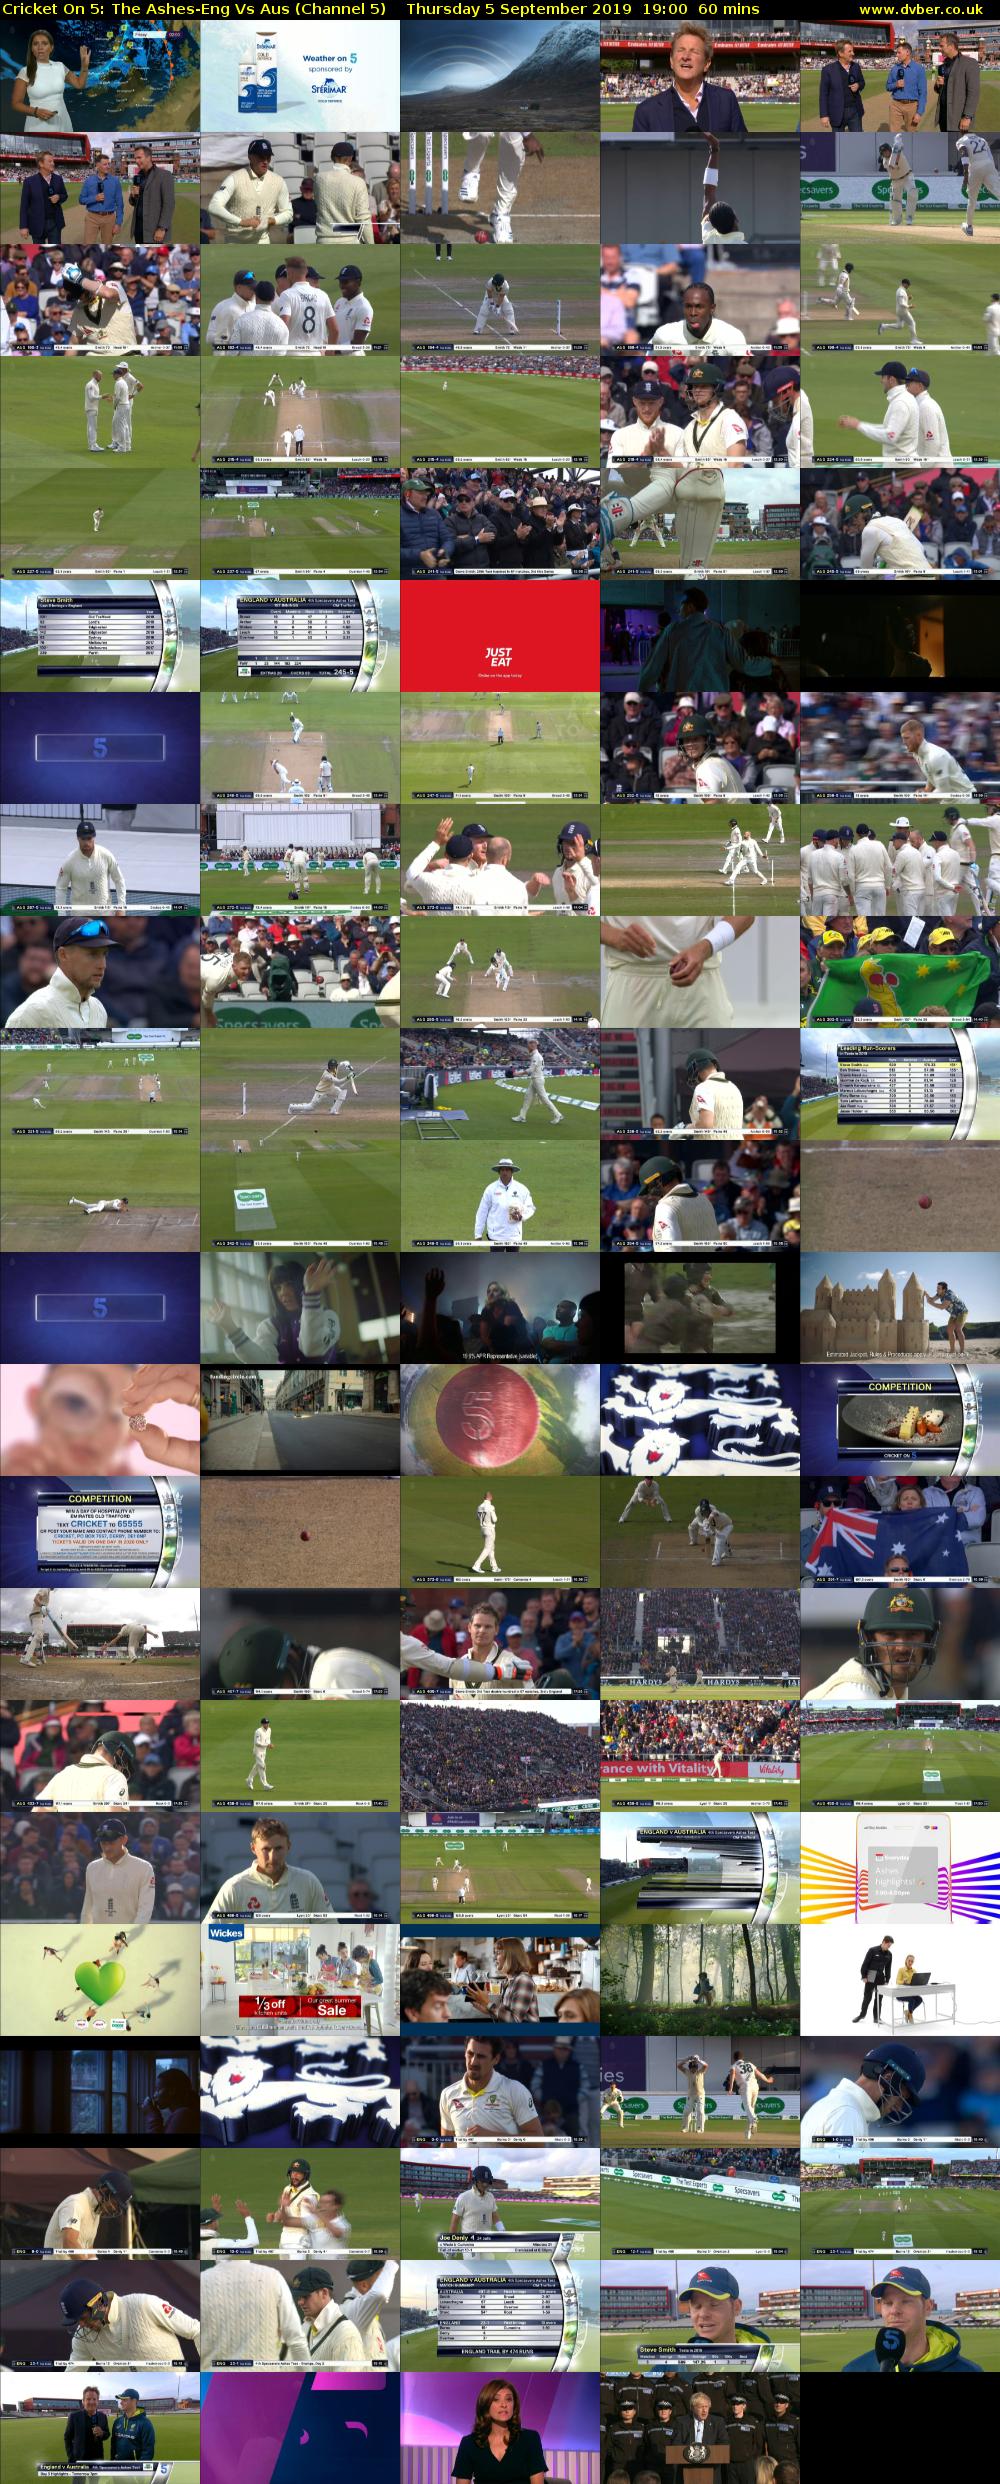 Cricket On 5: The Ashes-Eng Vs Aus (Channel 5) Thursday 5 September 2019 19:00 - 20:00